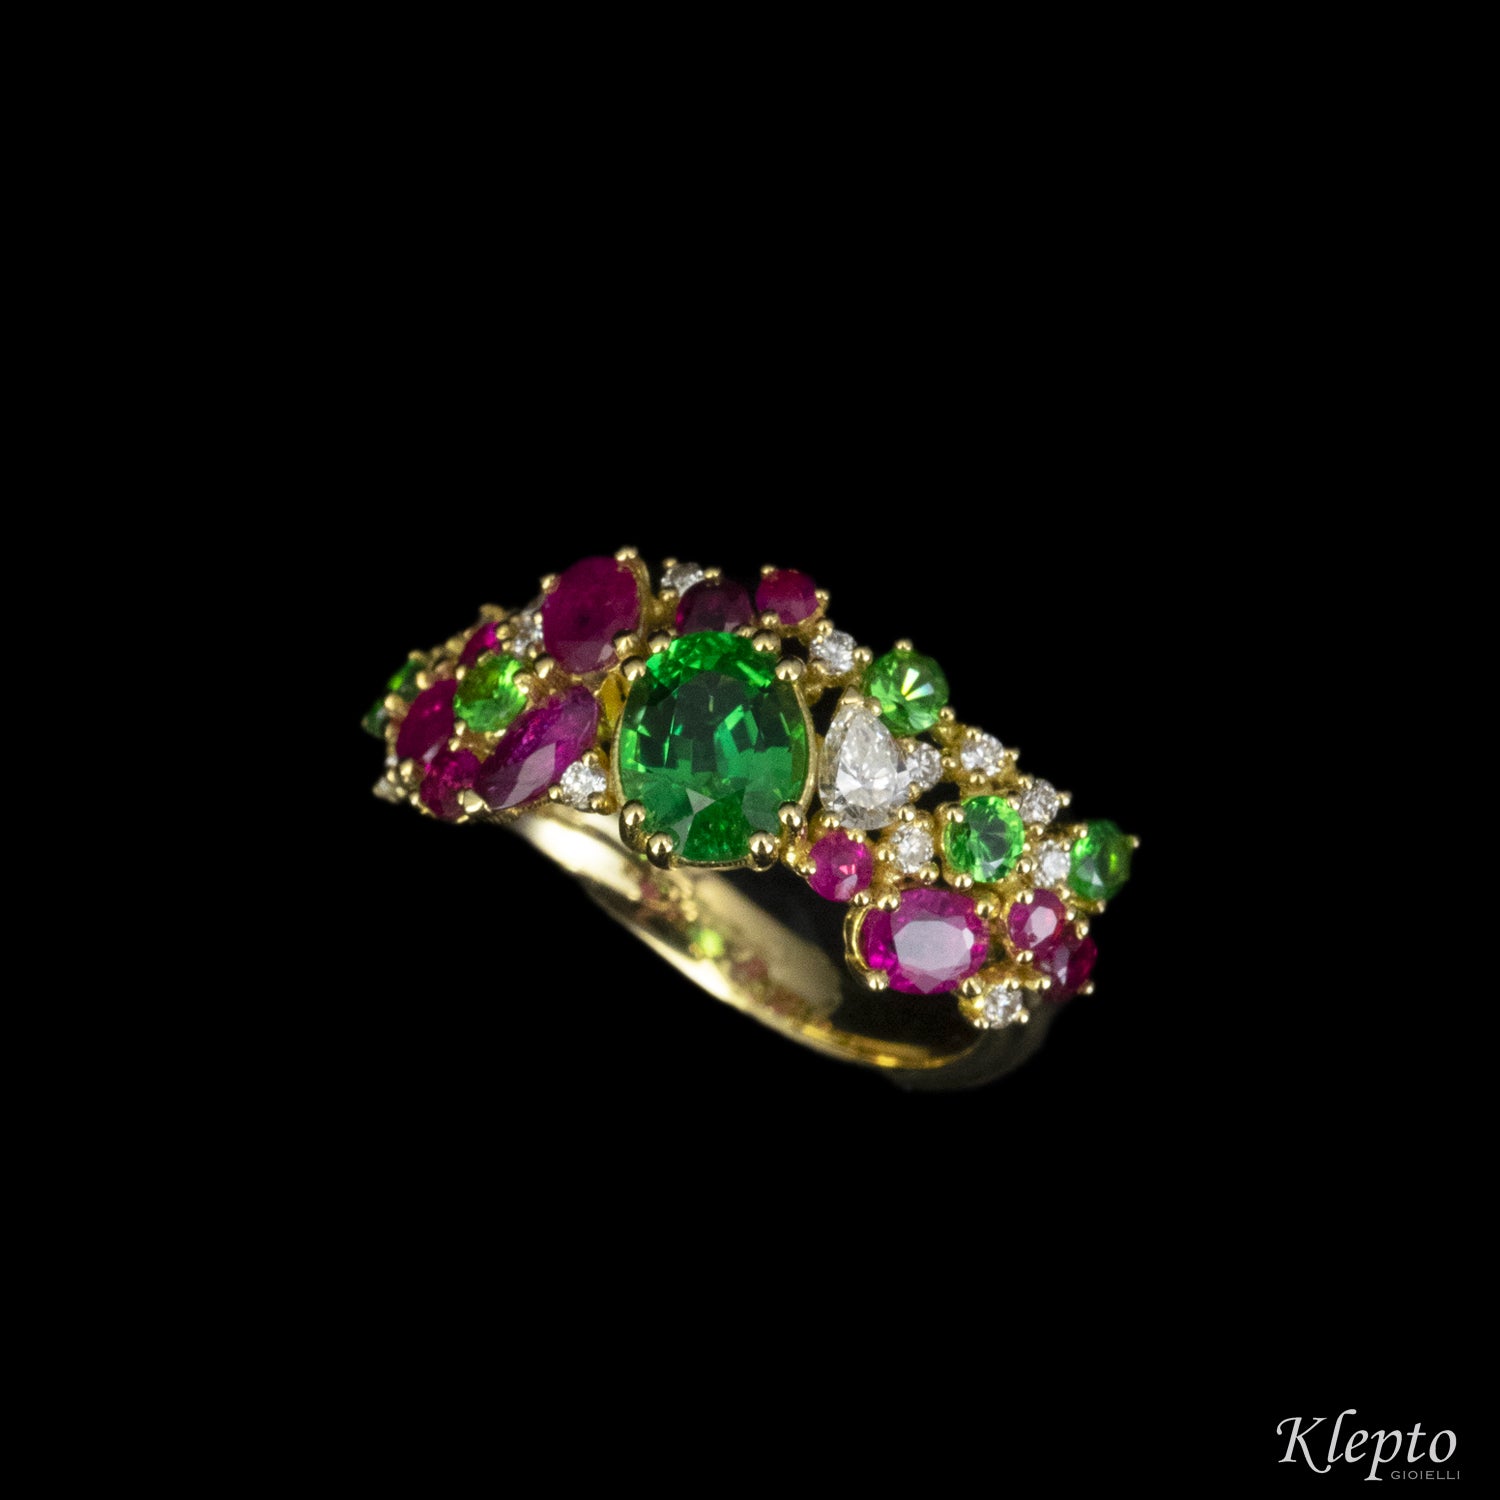 Classic ring in yellow gold with green garnets, rubies and diamonds